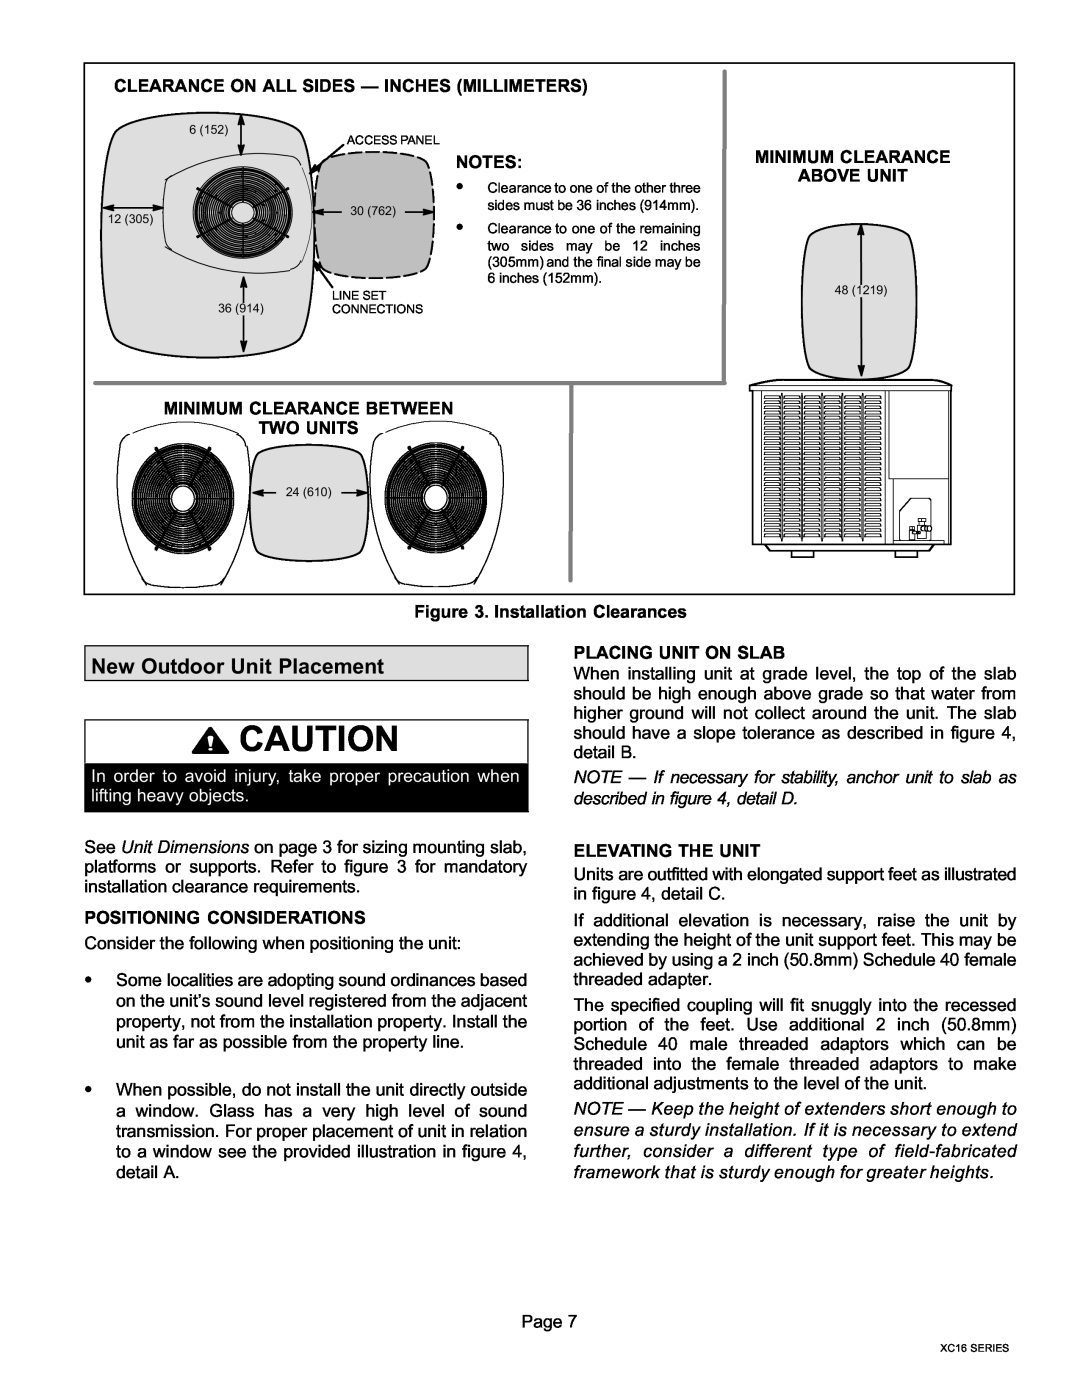 Lenox Elite Series X16 Air Conditioner Units, 506637-01 installation instructions New Outdoor Unit Placement 